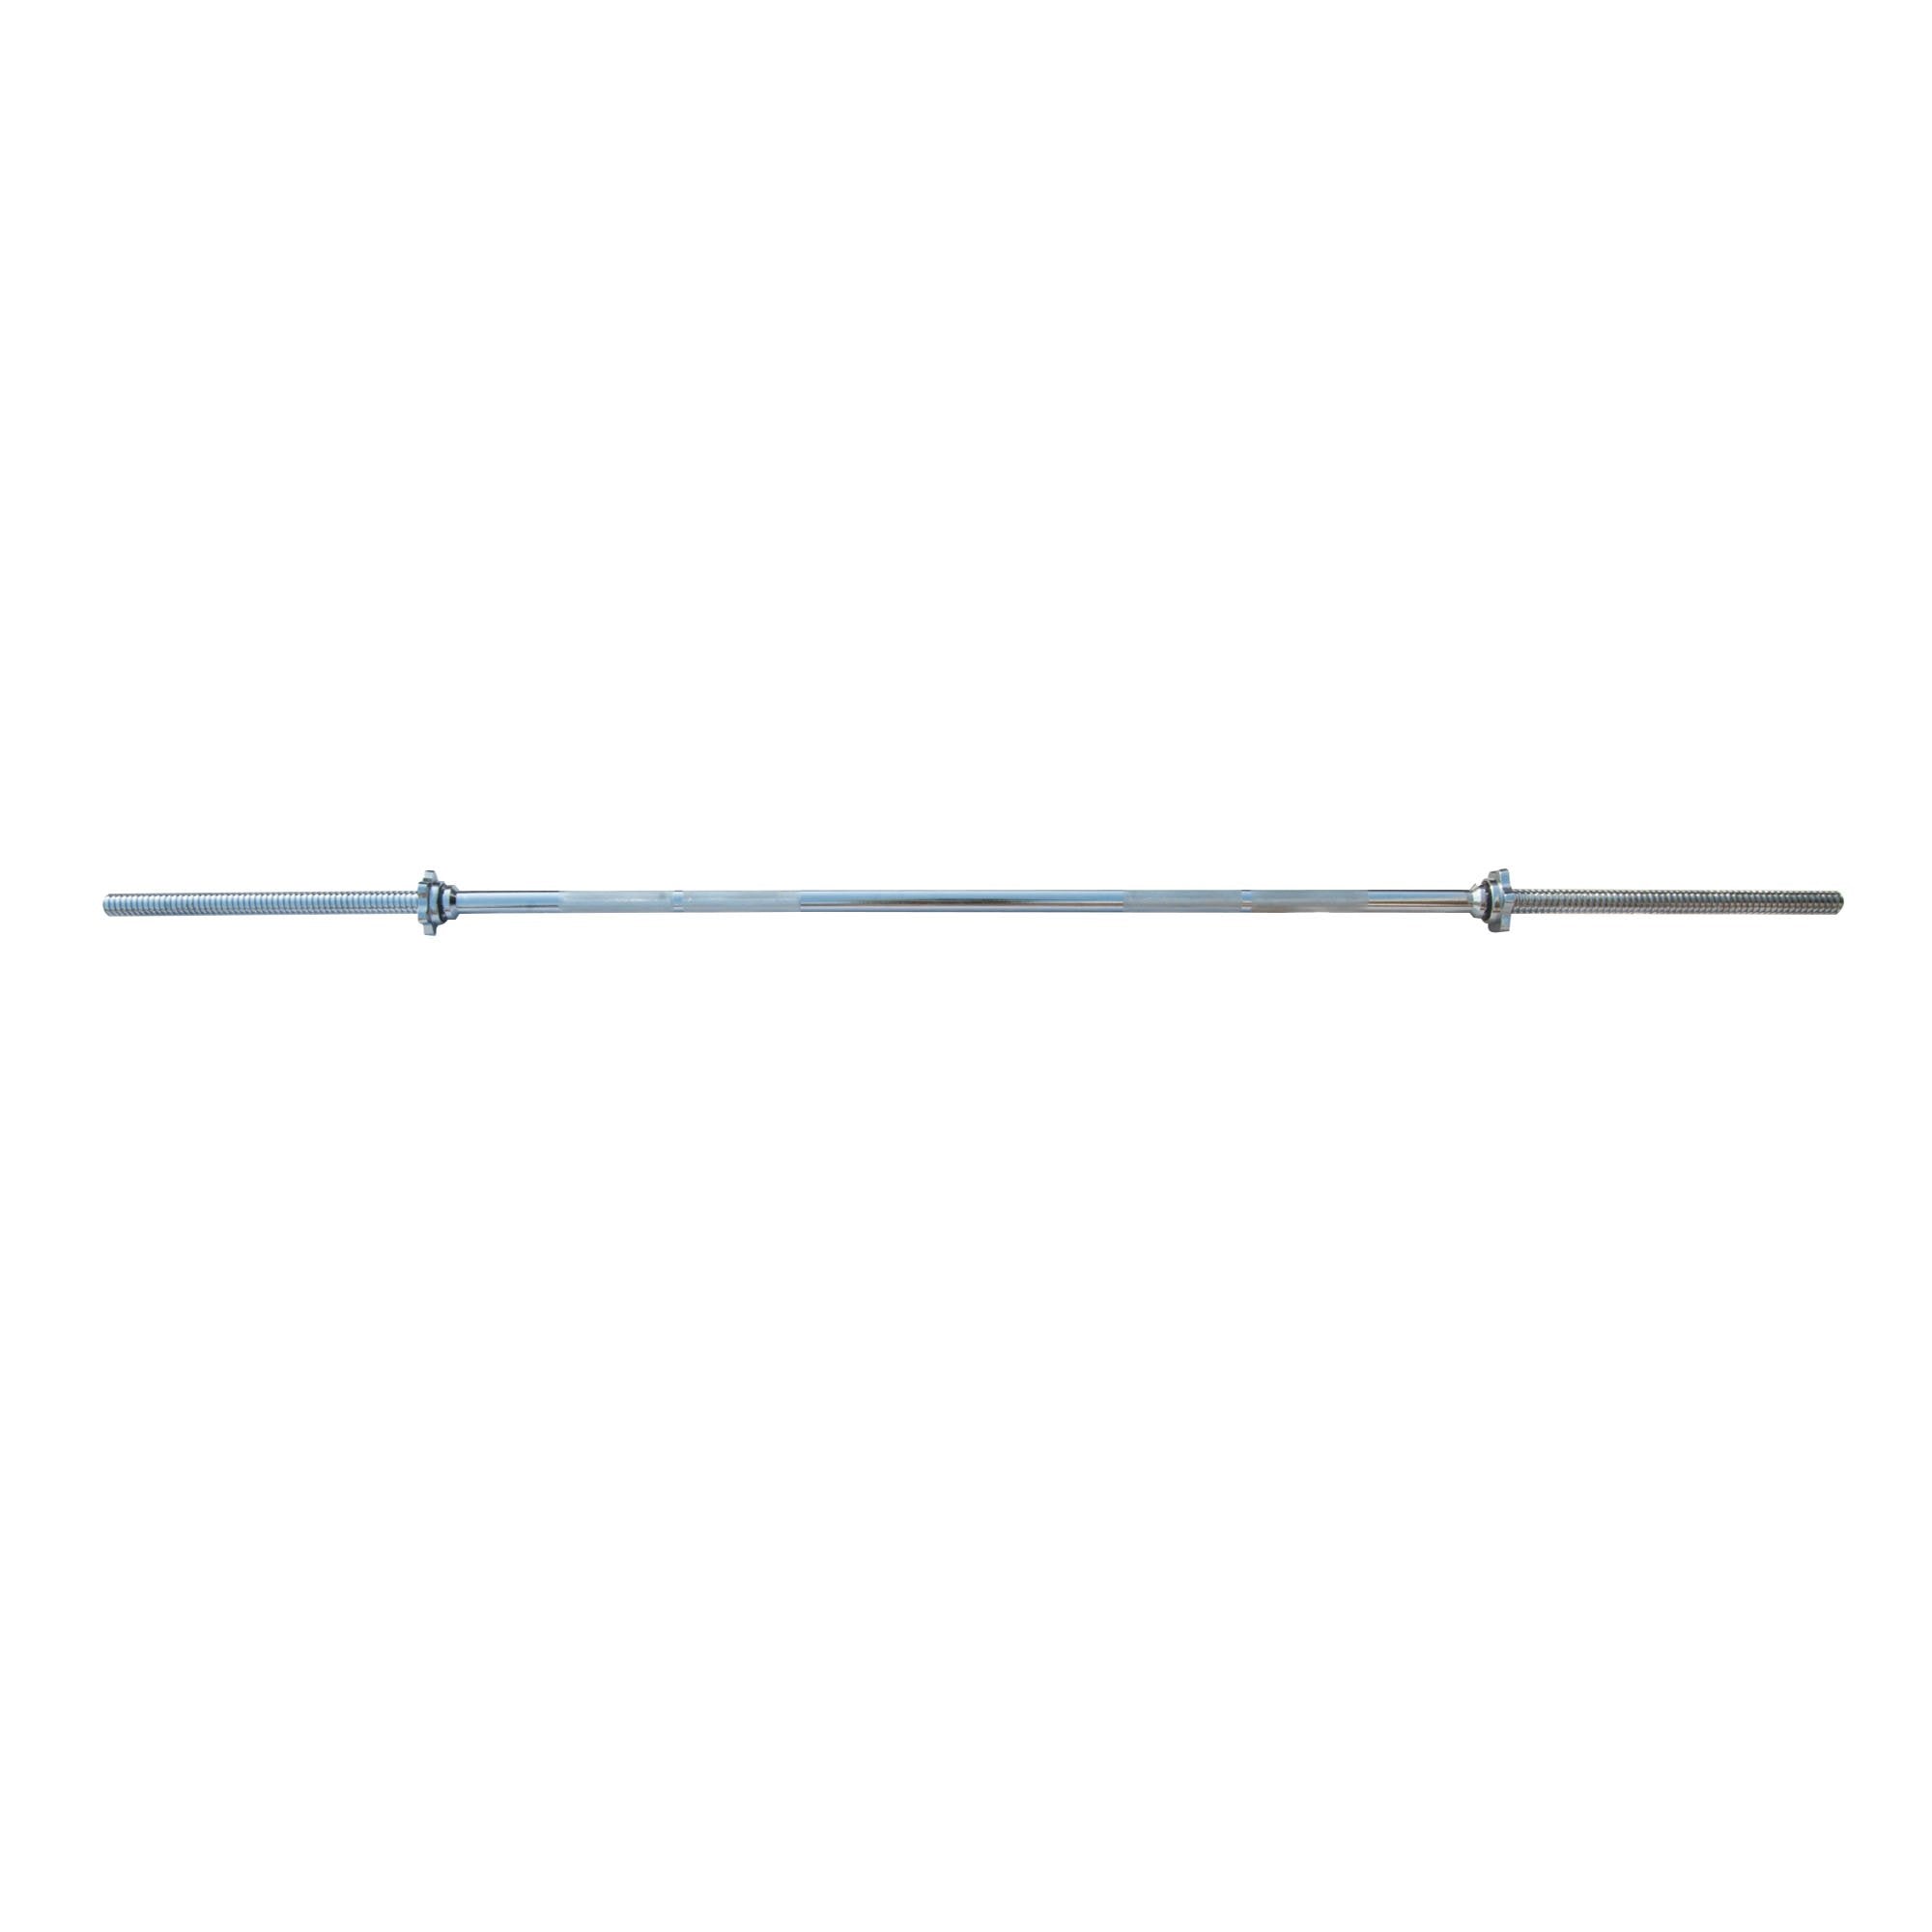 DKN 5ft Standard 1" Spinlock Barbell Bar with Collars